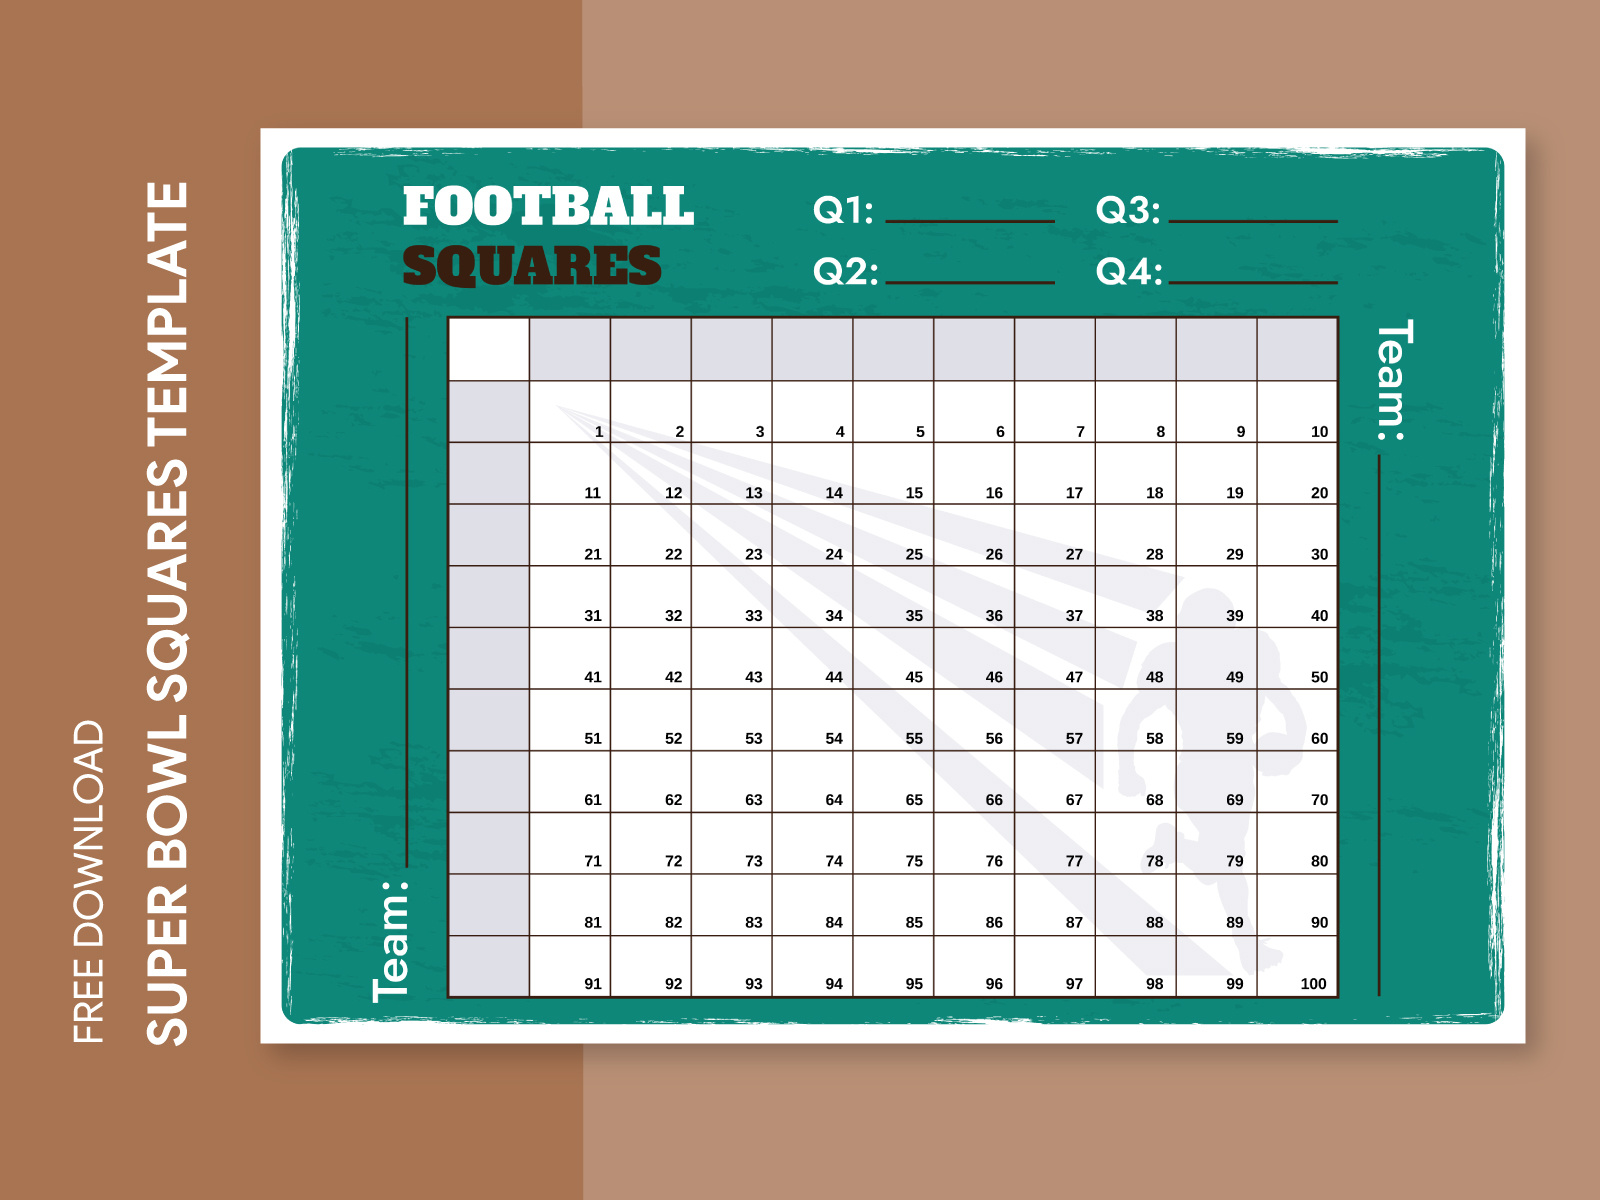 Super Bowl Squares With Numbers Free Google Docs Template by Free